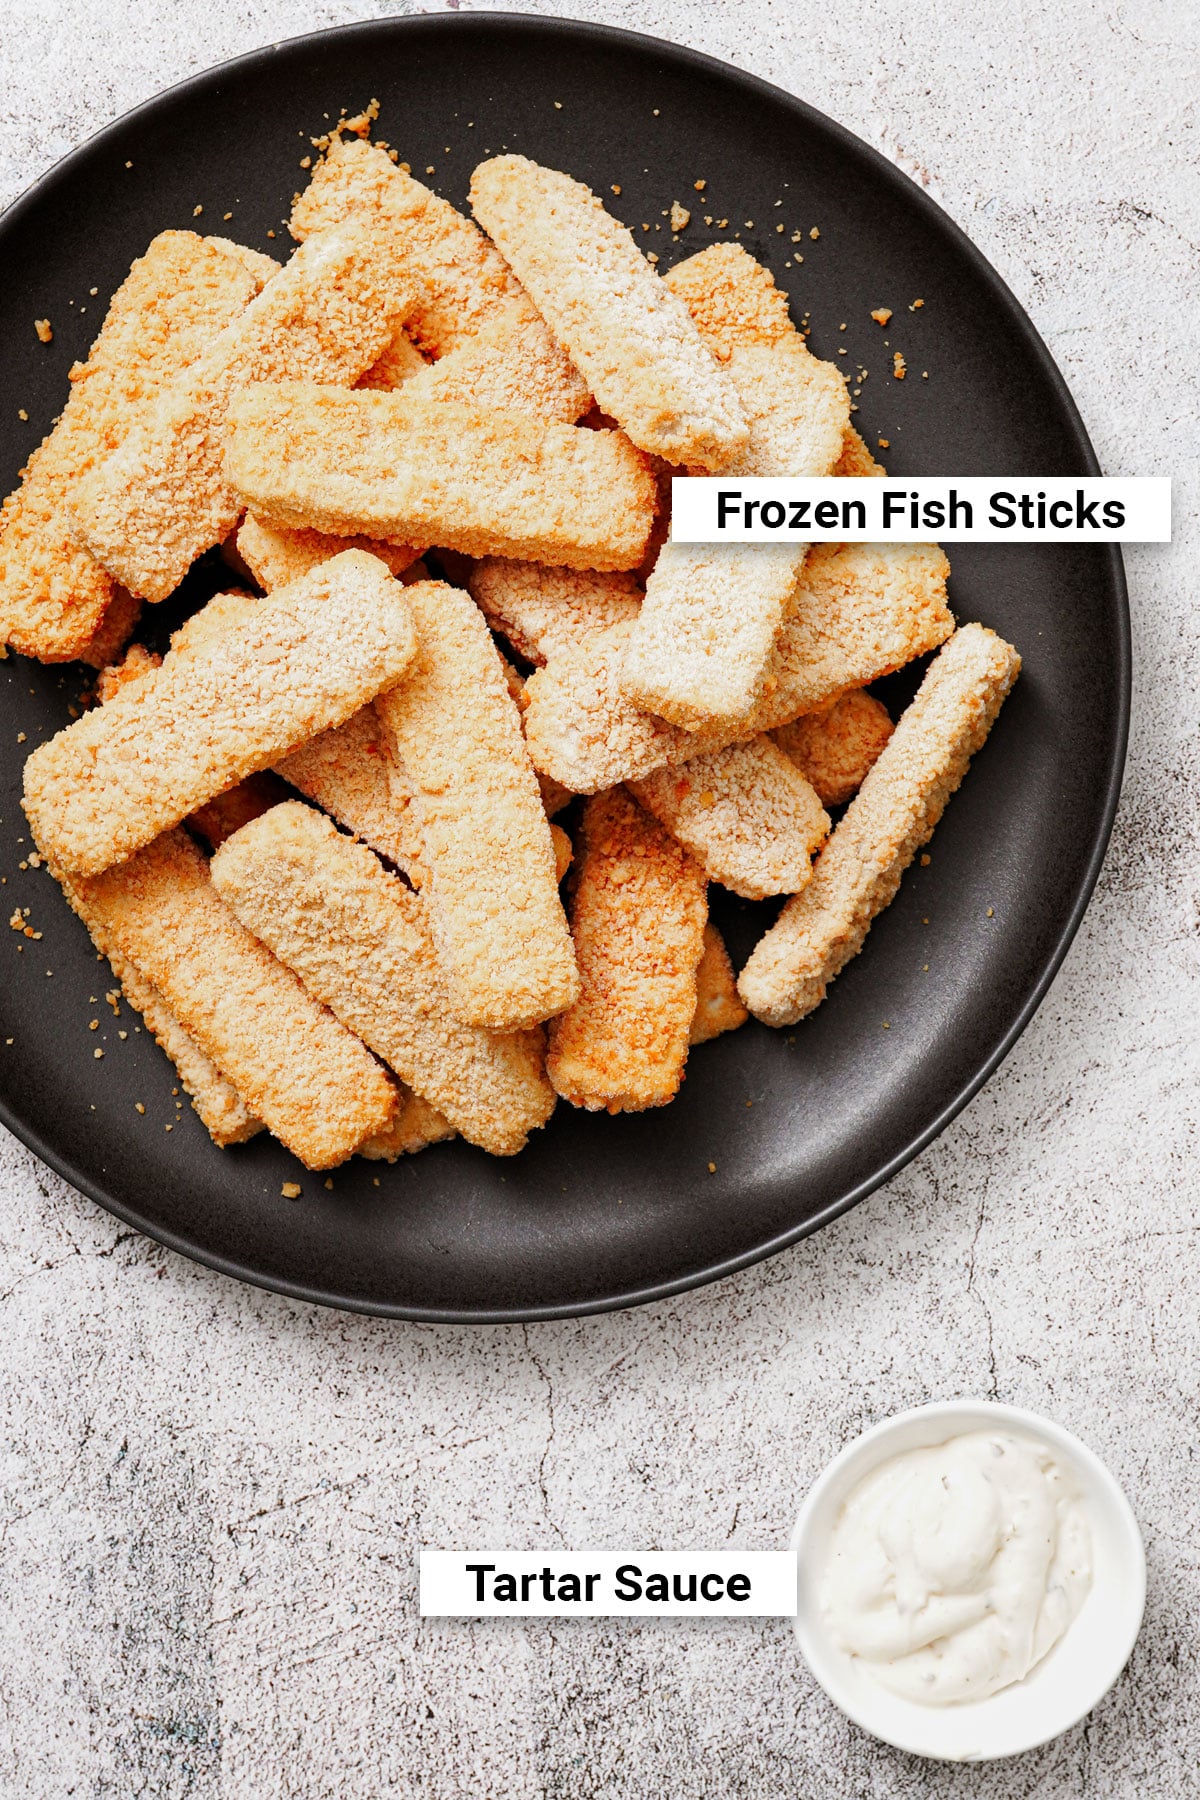 Uncooked frozen fish sticks on a black plate and tartar sauce in a dipping bowl.